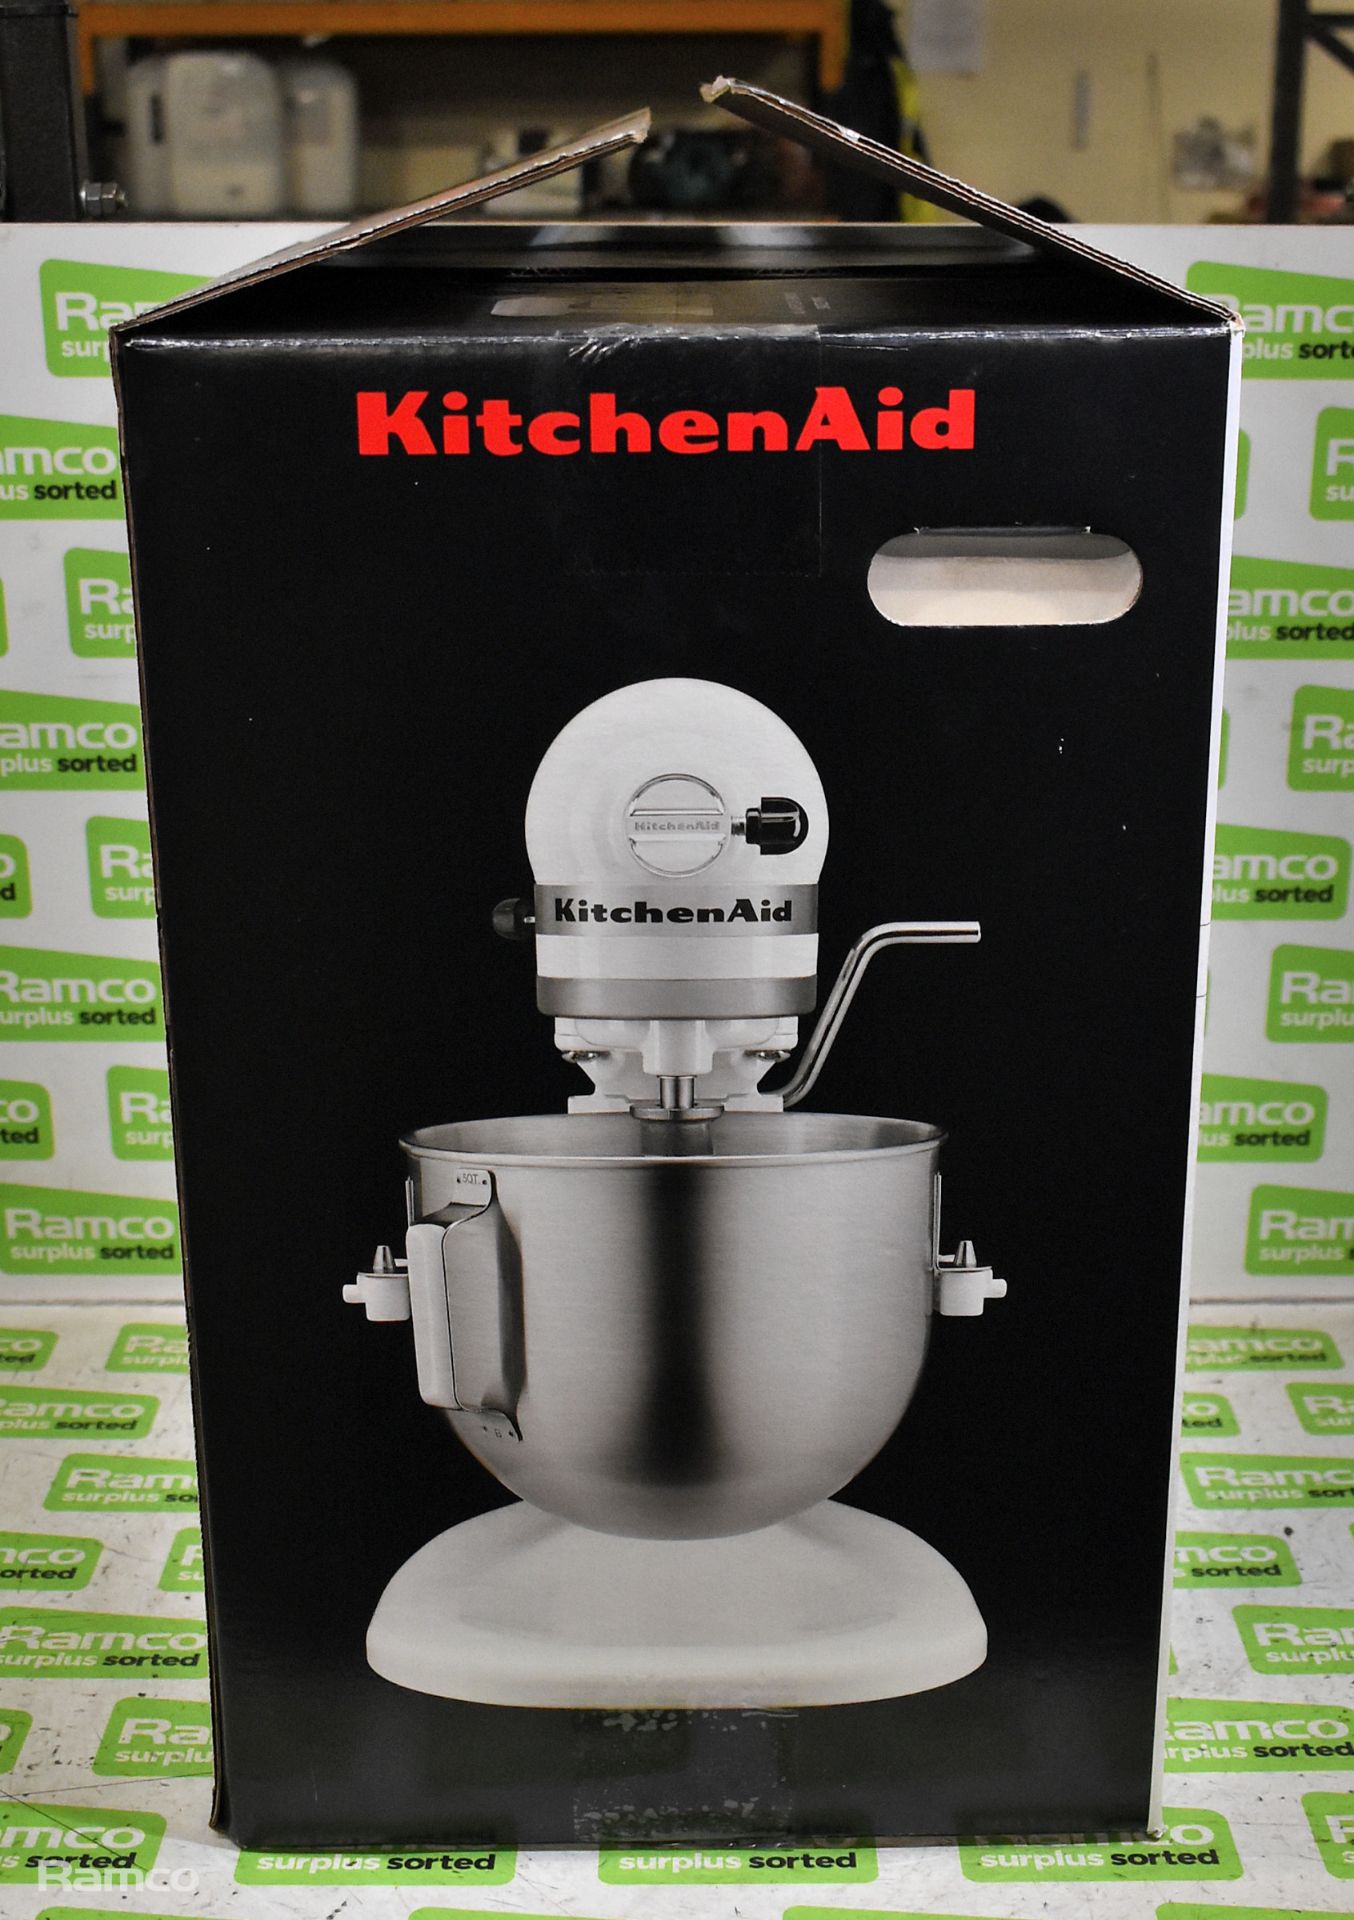 KitchenAid 5KPM5BWH electric stand mixer with accessories 240V - Image 9 of 9